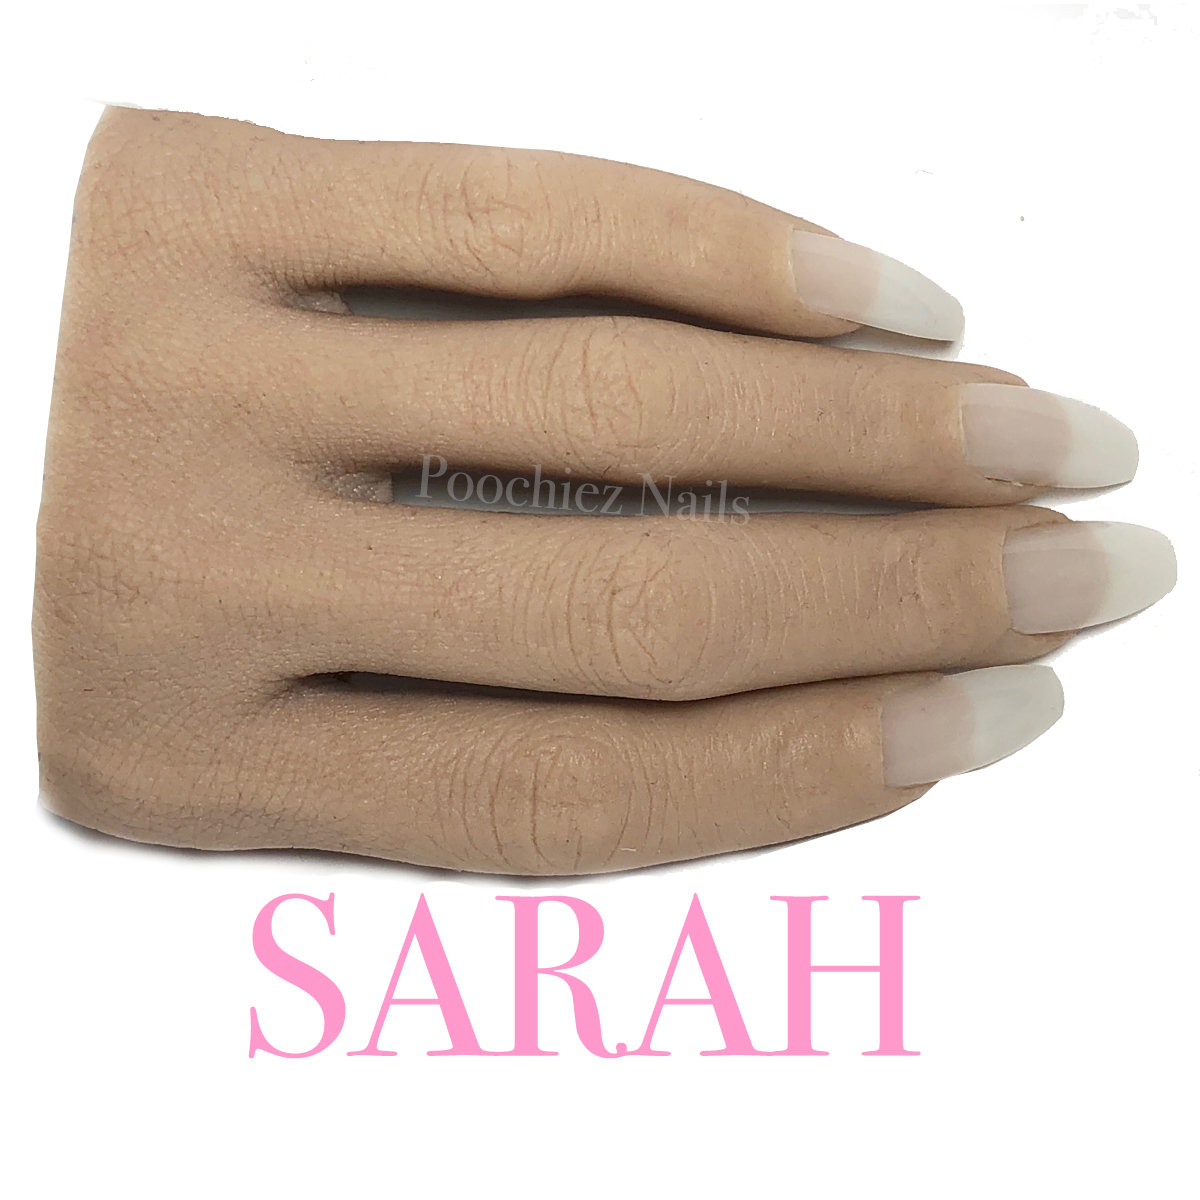 (H5) SARAH HALF REALISTIC PRACTICE HAND ( PLEASE READ THE DIRECTIONS & WATCH THE VIDEOS BELOW) WILL TAKE 5-8 DAYS TO PROCESS.